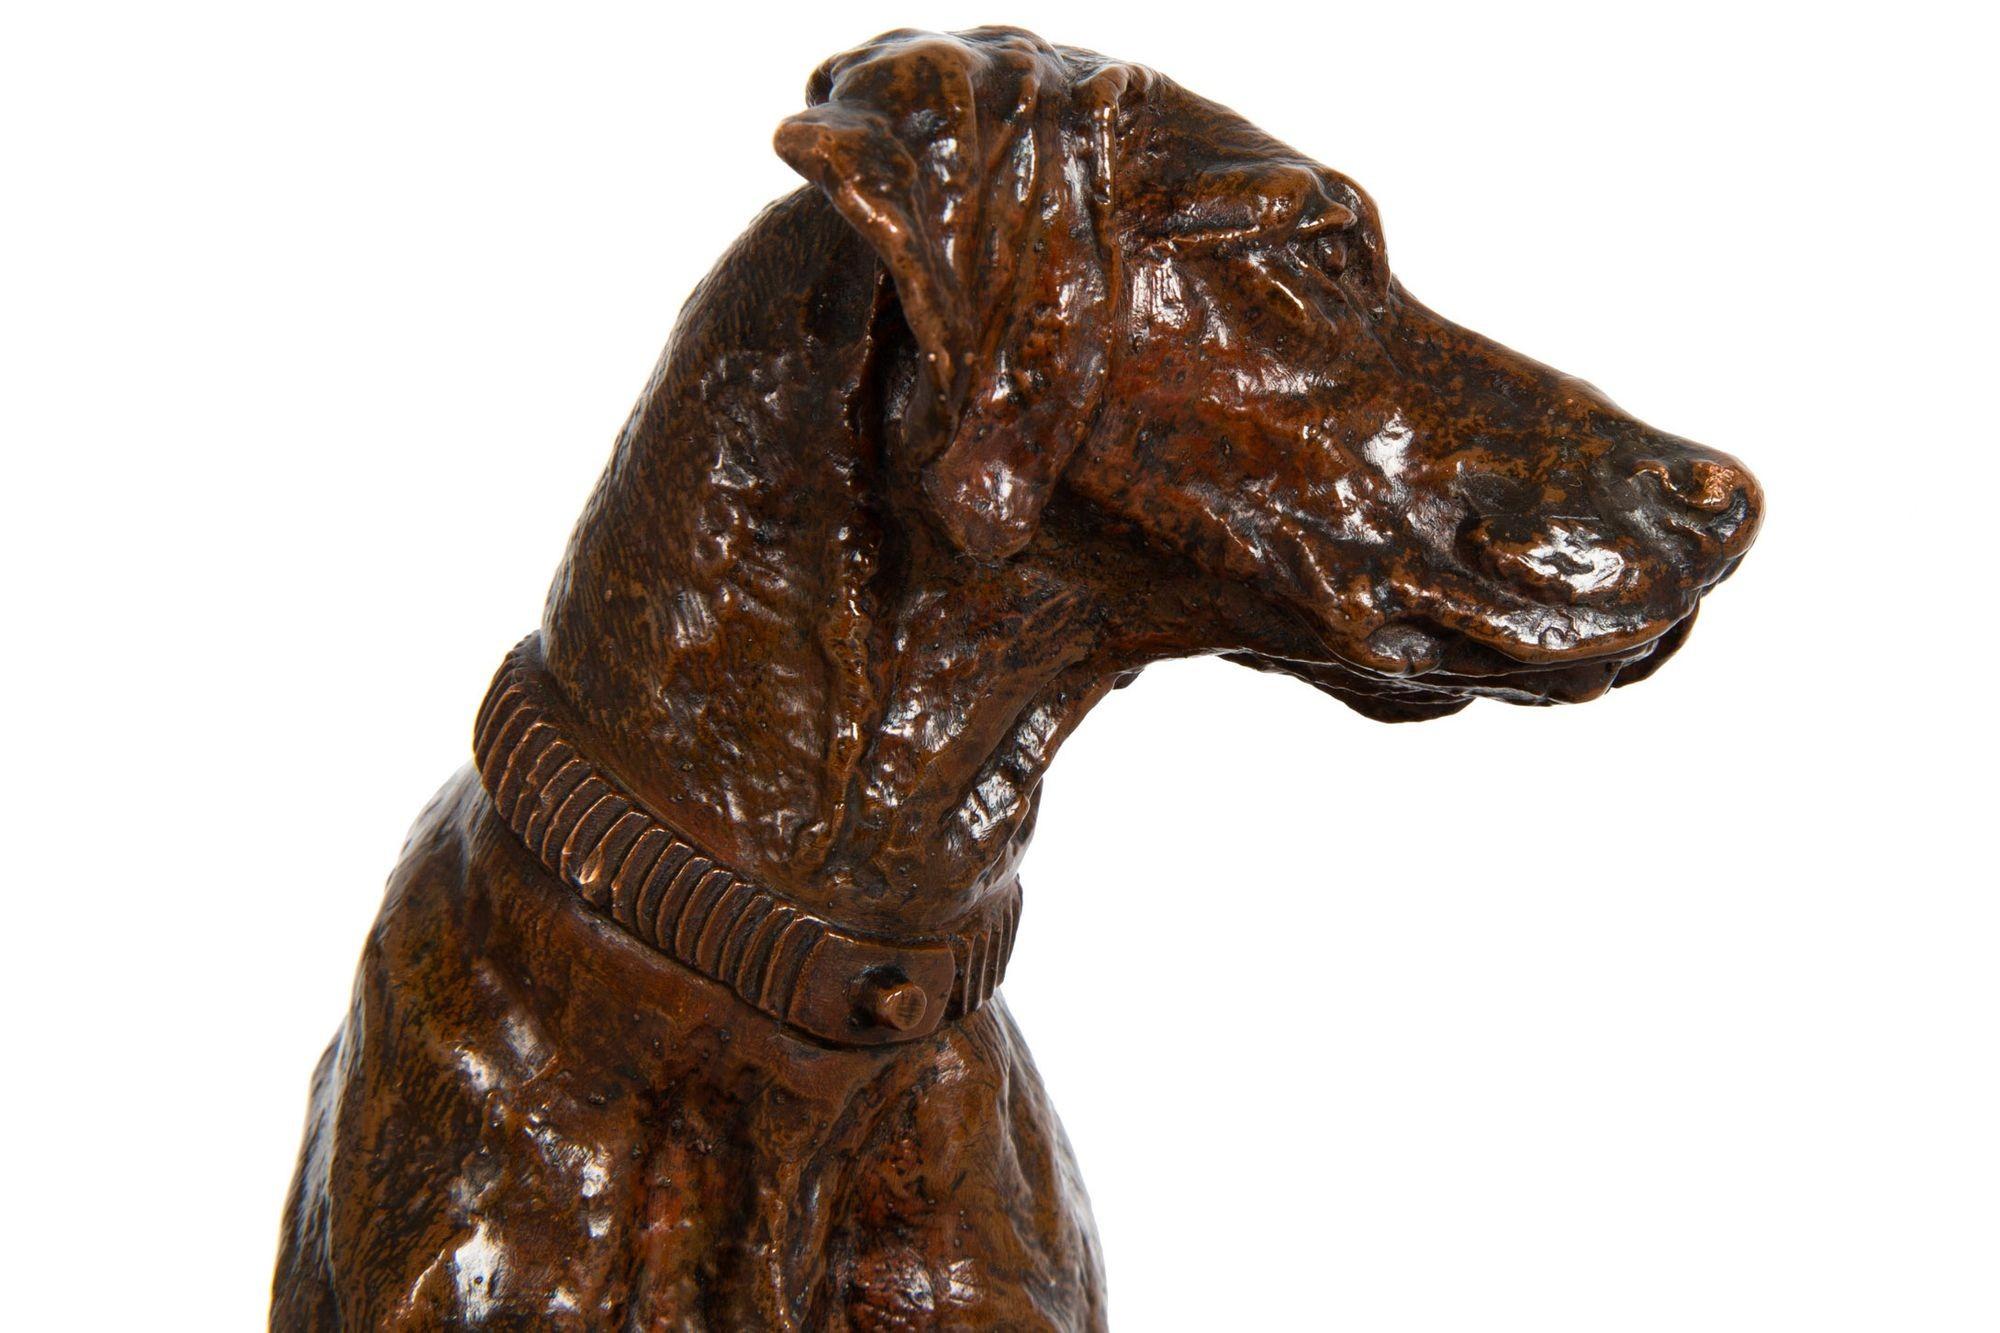 French Antique Copper-Electrotype Sculpture “Chien Braque”, Pierre-Jules Mêne For Sale 1